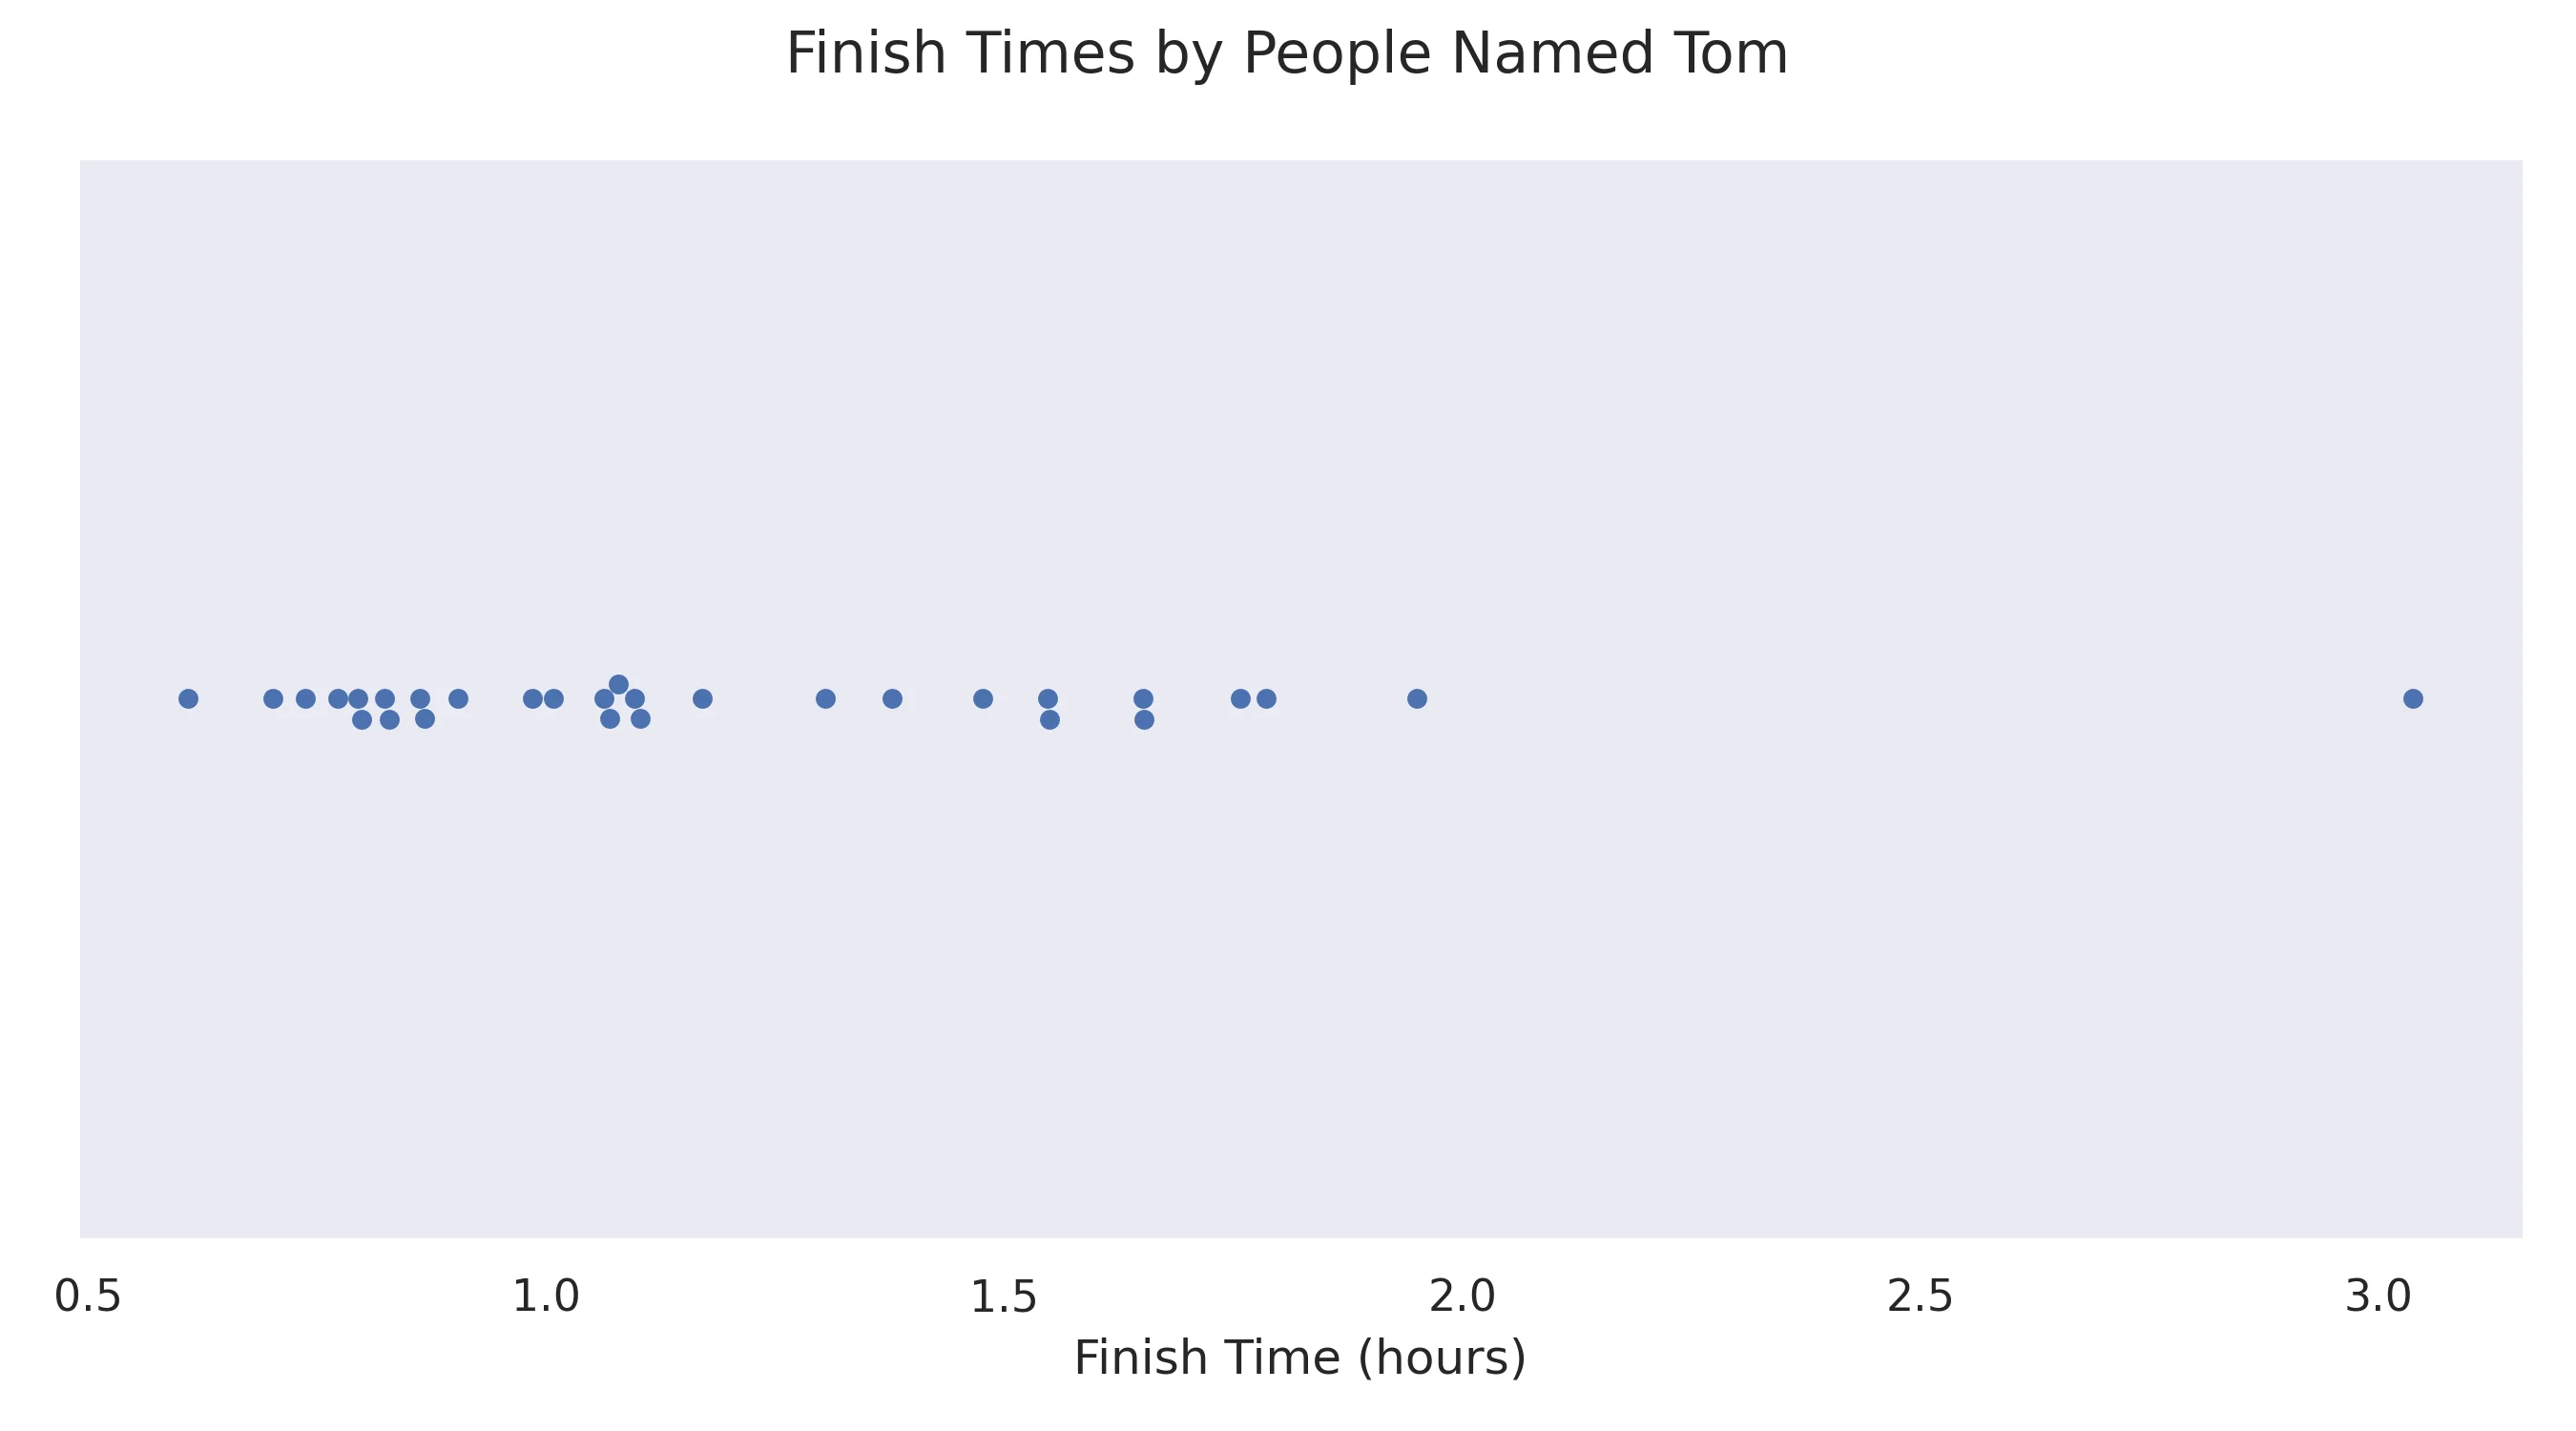 A dot plot of Monument Avenue 10k finishes by people named Tom. One Tom took a lot longer than the other Toms to finish, but they still did it which I think is great.